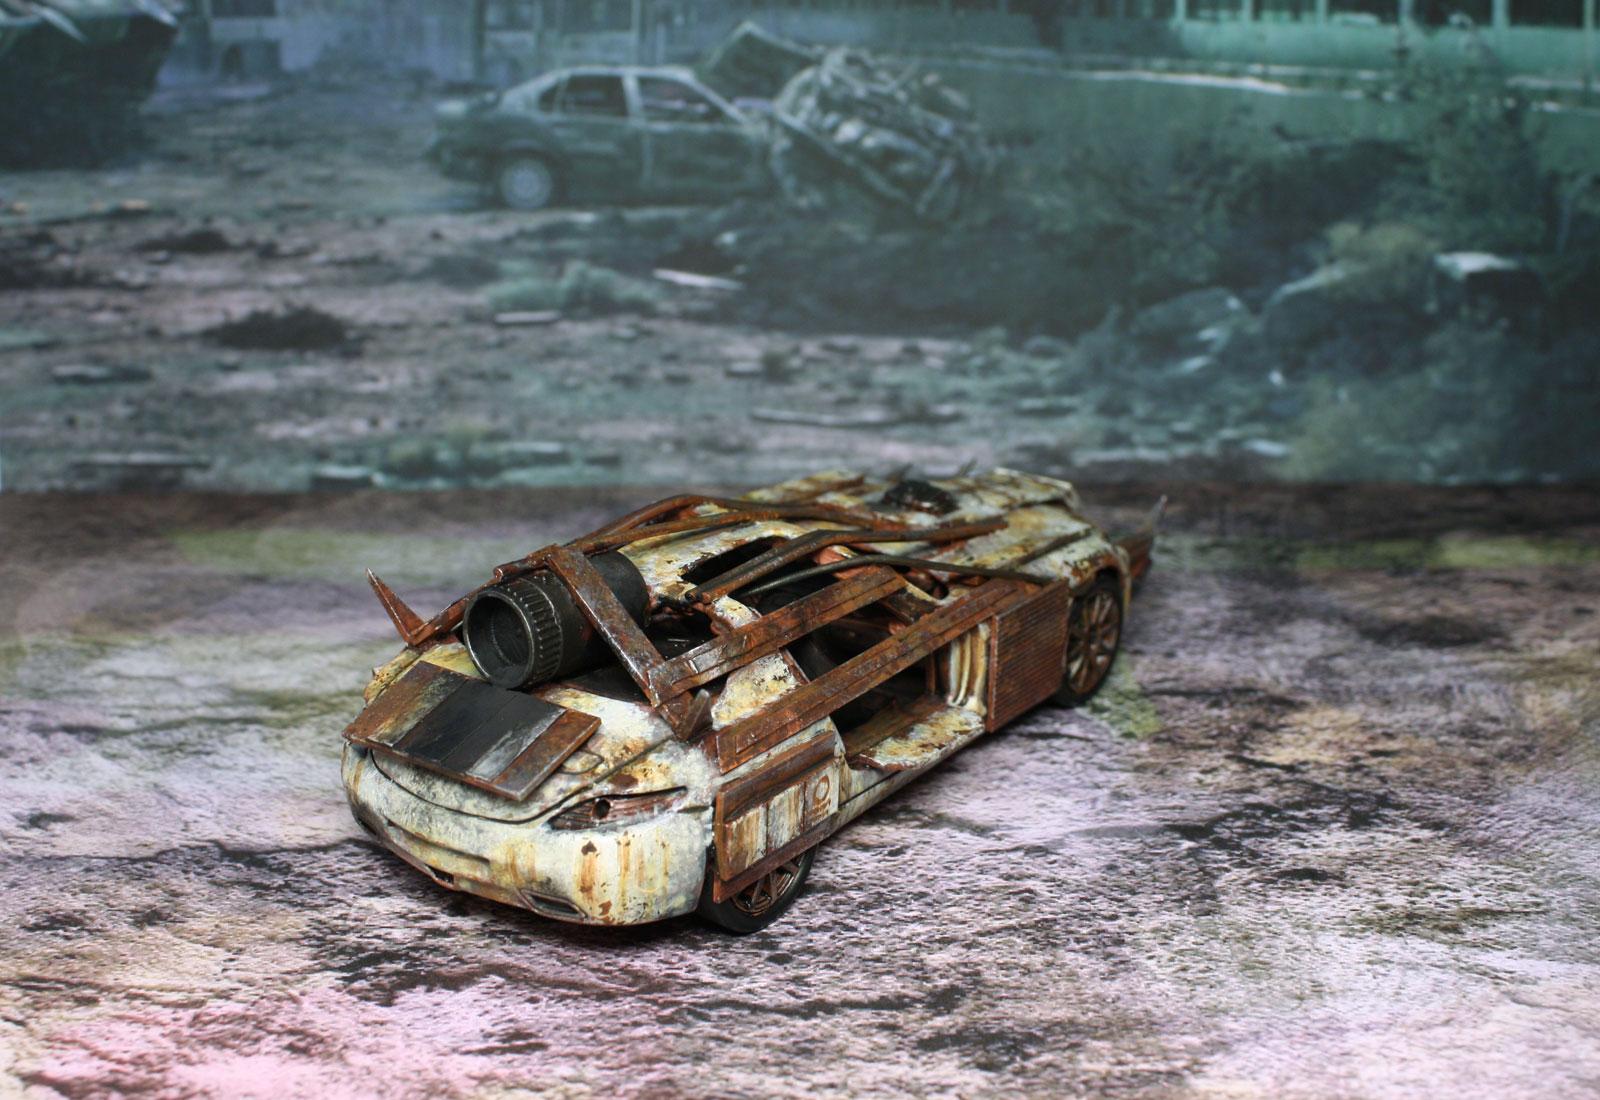 Apo, Apocalypse, Button, Cars, Mad, Max, Nation, Post, Rbn, Red, Rust, Weathered